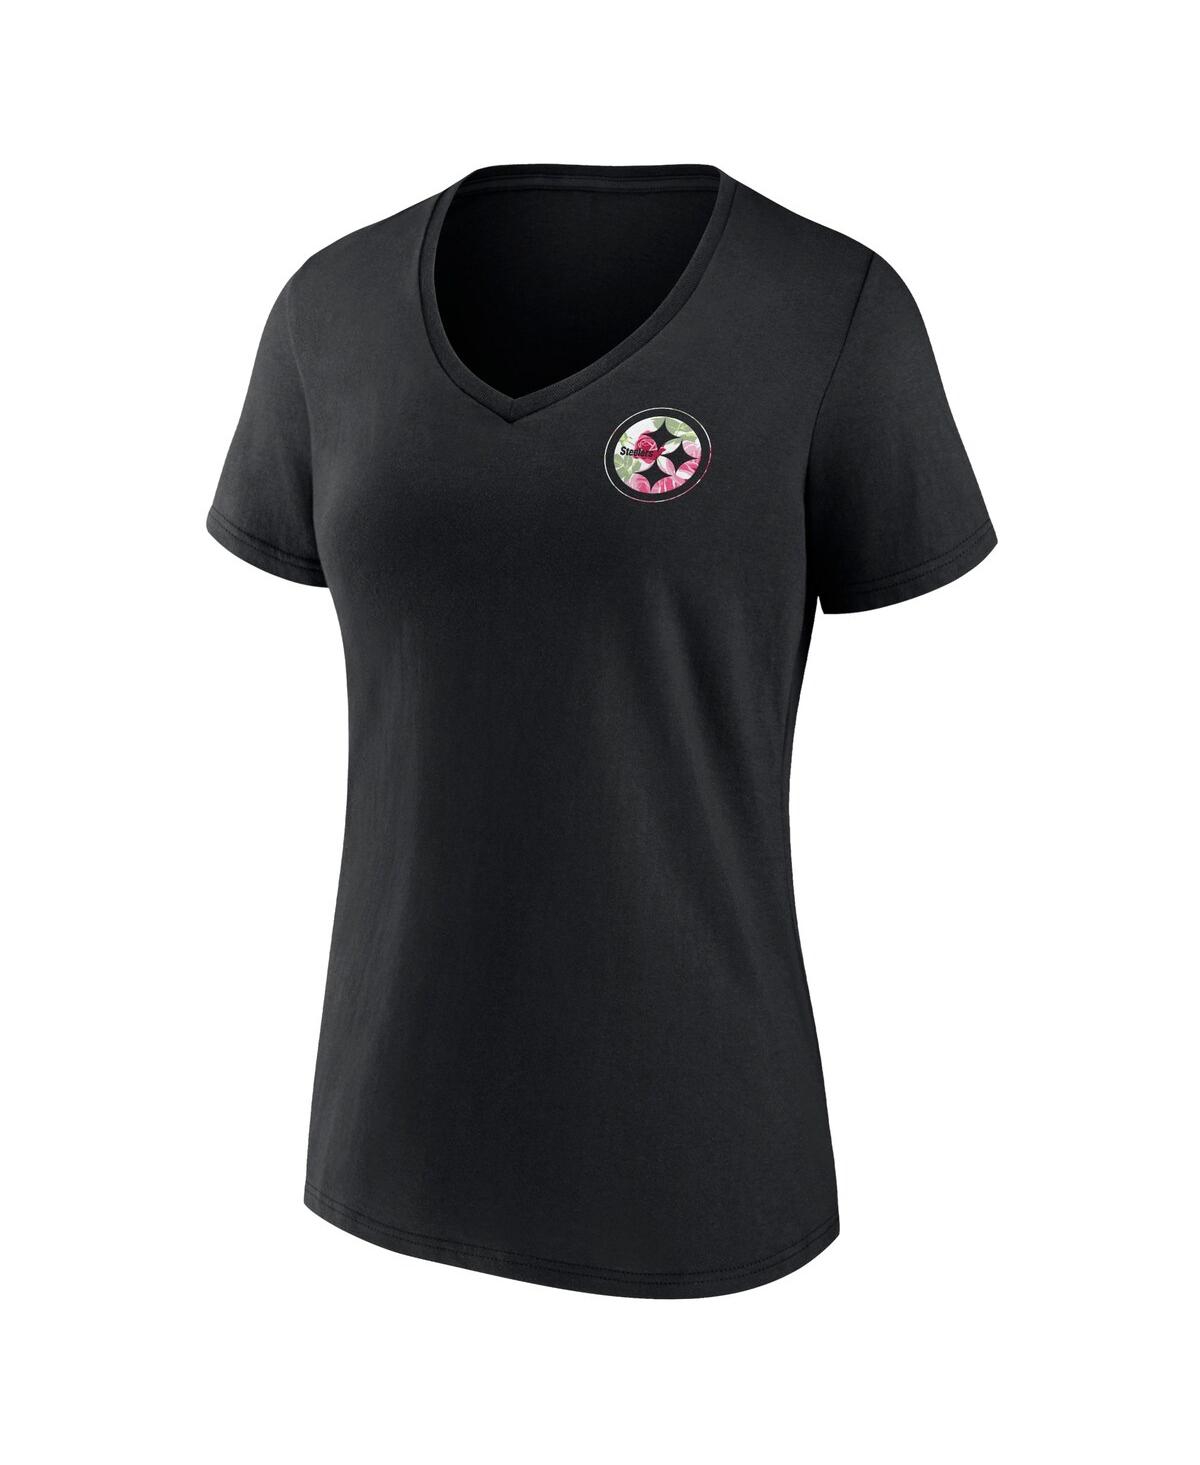 Shop Fanatics Women's  Black Pittsburgh Steelers Plus Size Mother's Day #1 Mom V-neck T-shirt